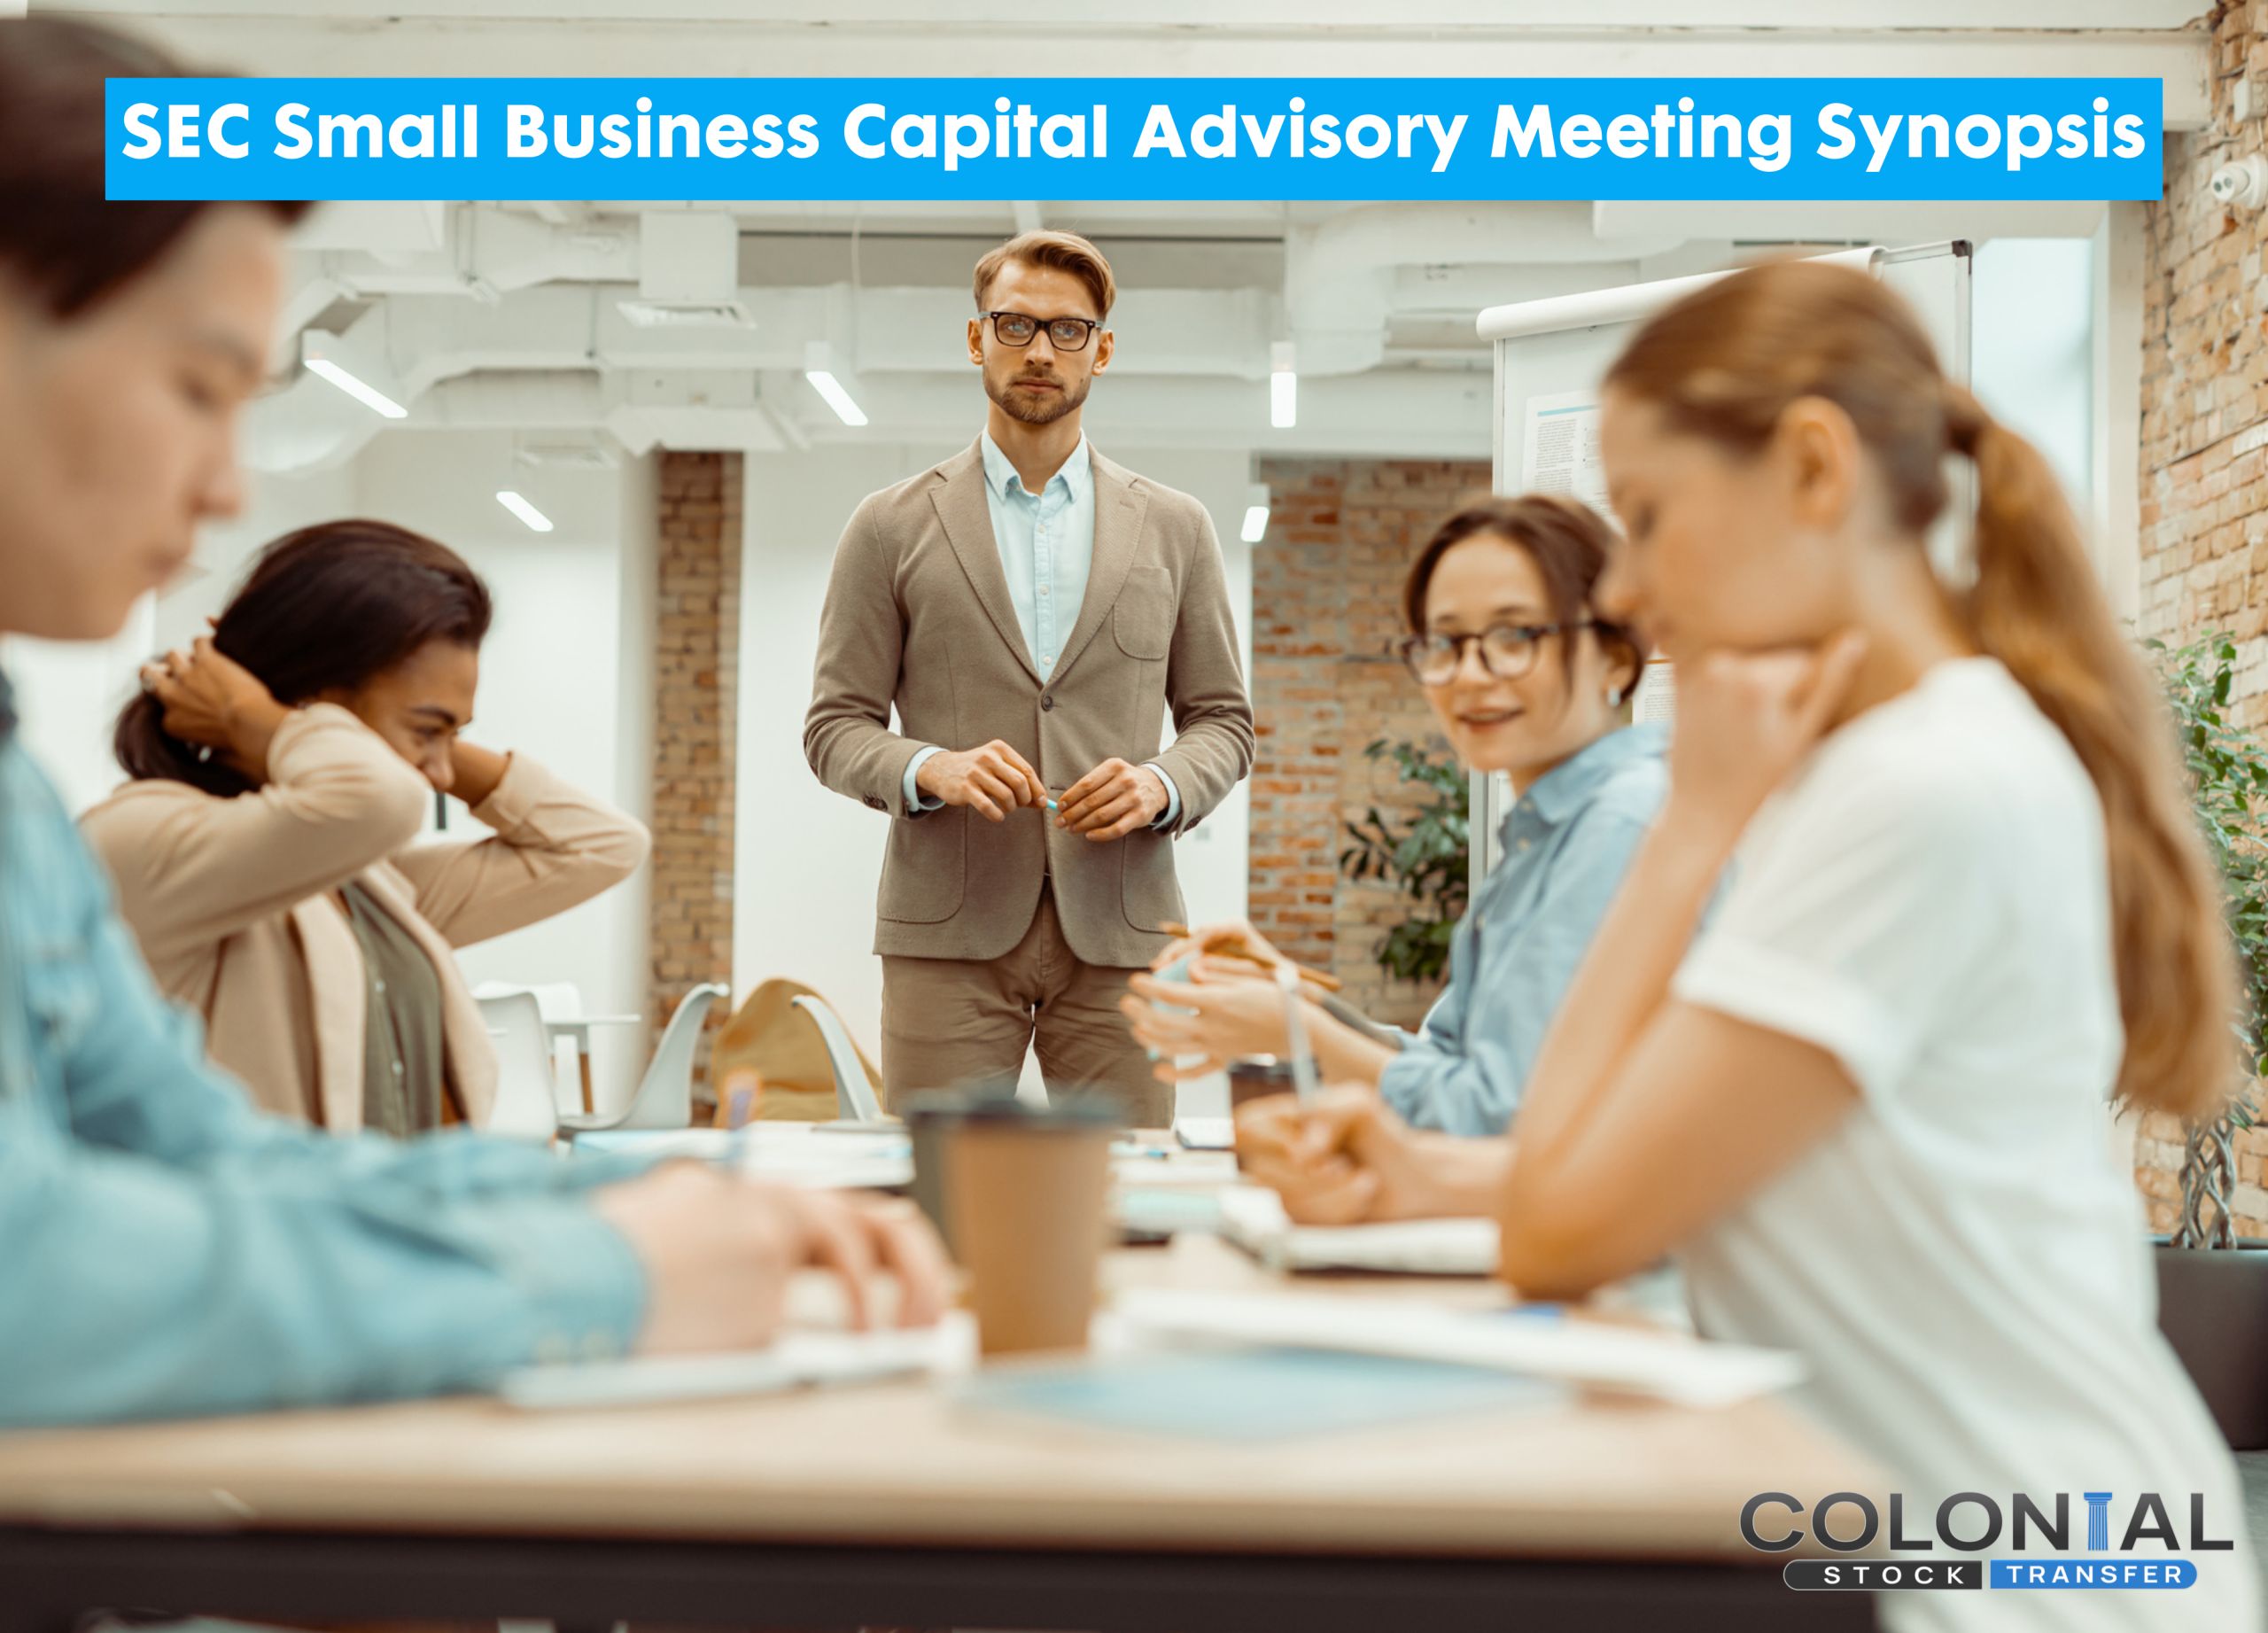 SEC Small Business Capital Advisory Meeting Synopsis